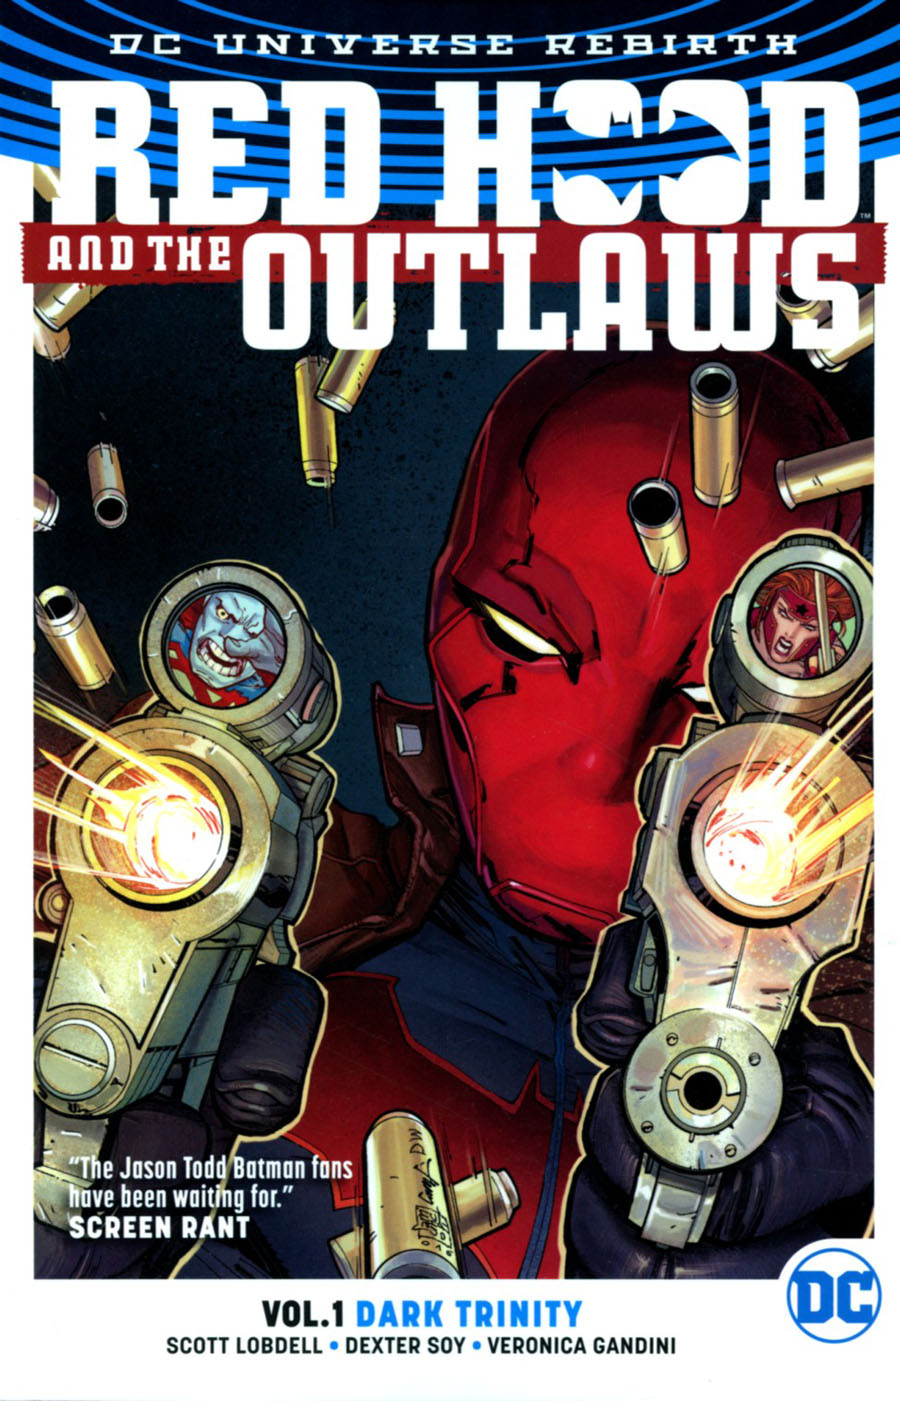 Red Hood And The Outlaws (Rebirth) Vol 1 Dark Trinity TP